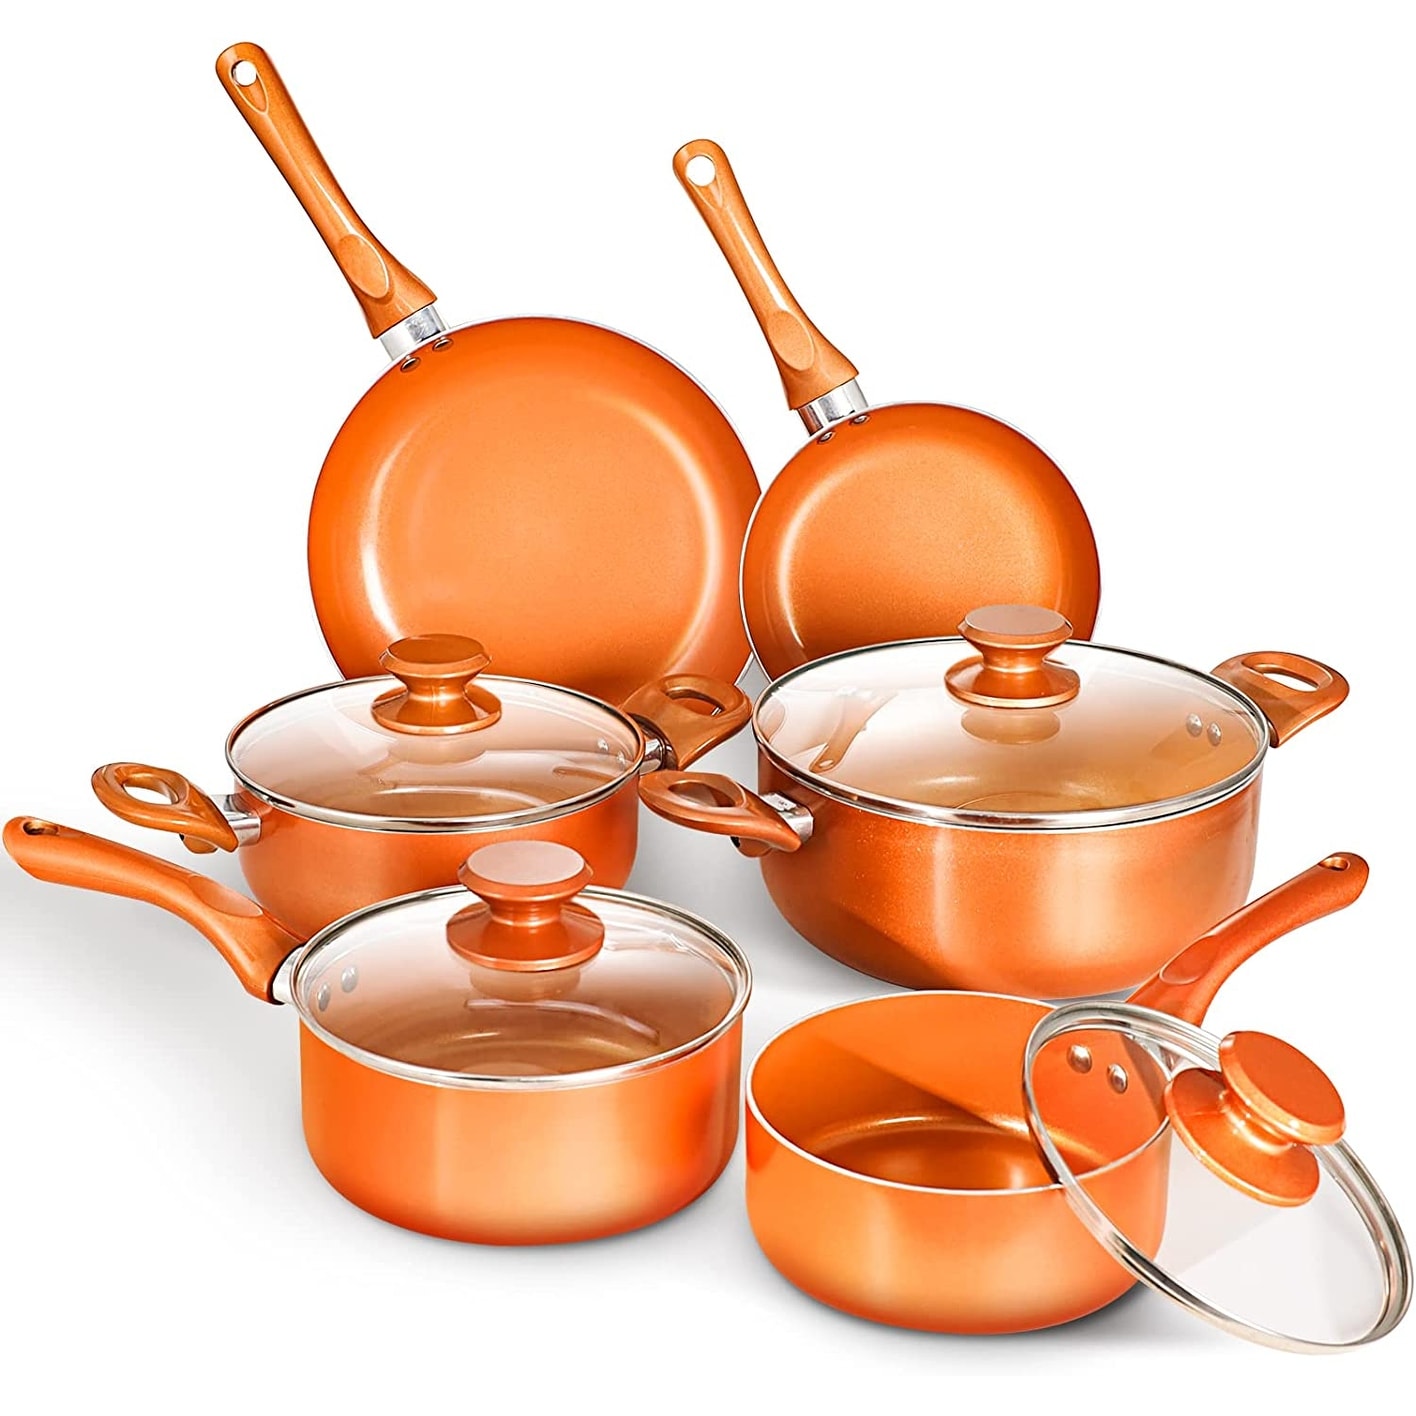 https://ak1.ostkcdn.com/images/products/is/images/direct/30dac88dd5aaa2ca1c069e181efd445e247089a8/6-piece-Non-stick-Cookware-Set-Pots-and-Pans-Set-for-Cooking---Ceramic-Coating-Saucepan%2C-Stock-Pot-with-Lid%2C-Frying-Pan%2C-Copper.jpg